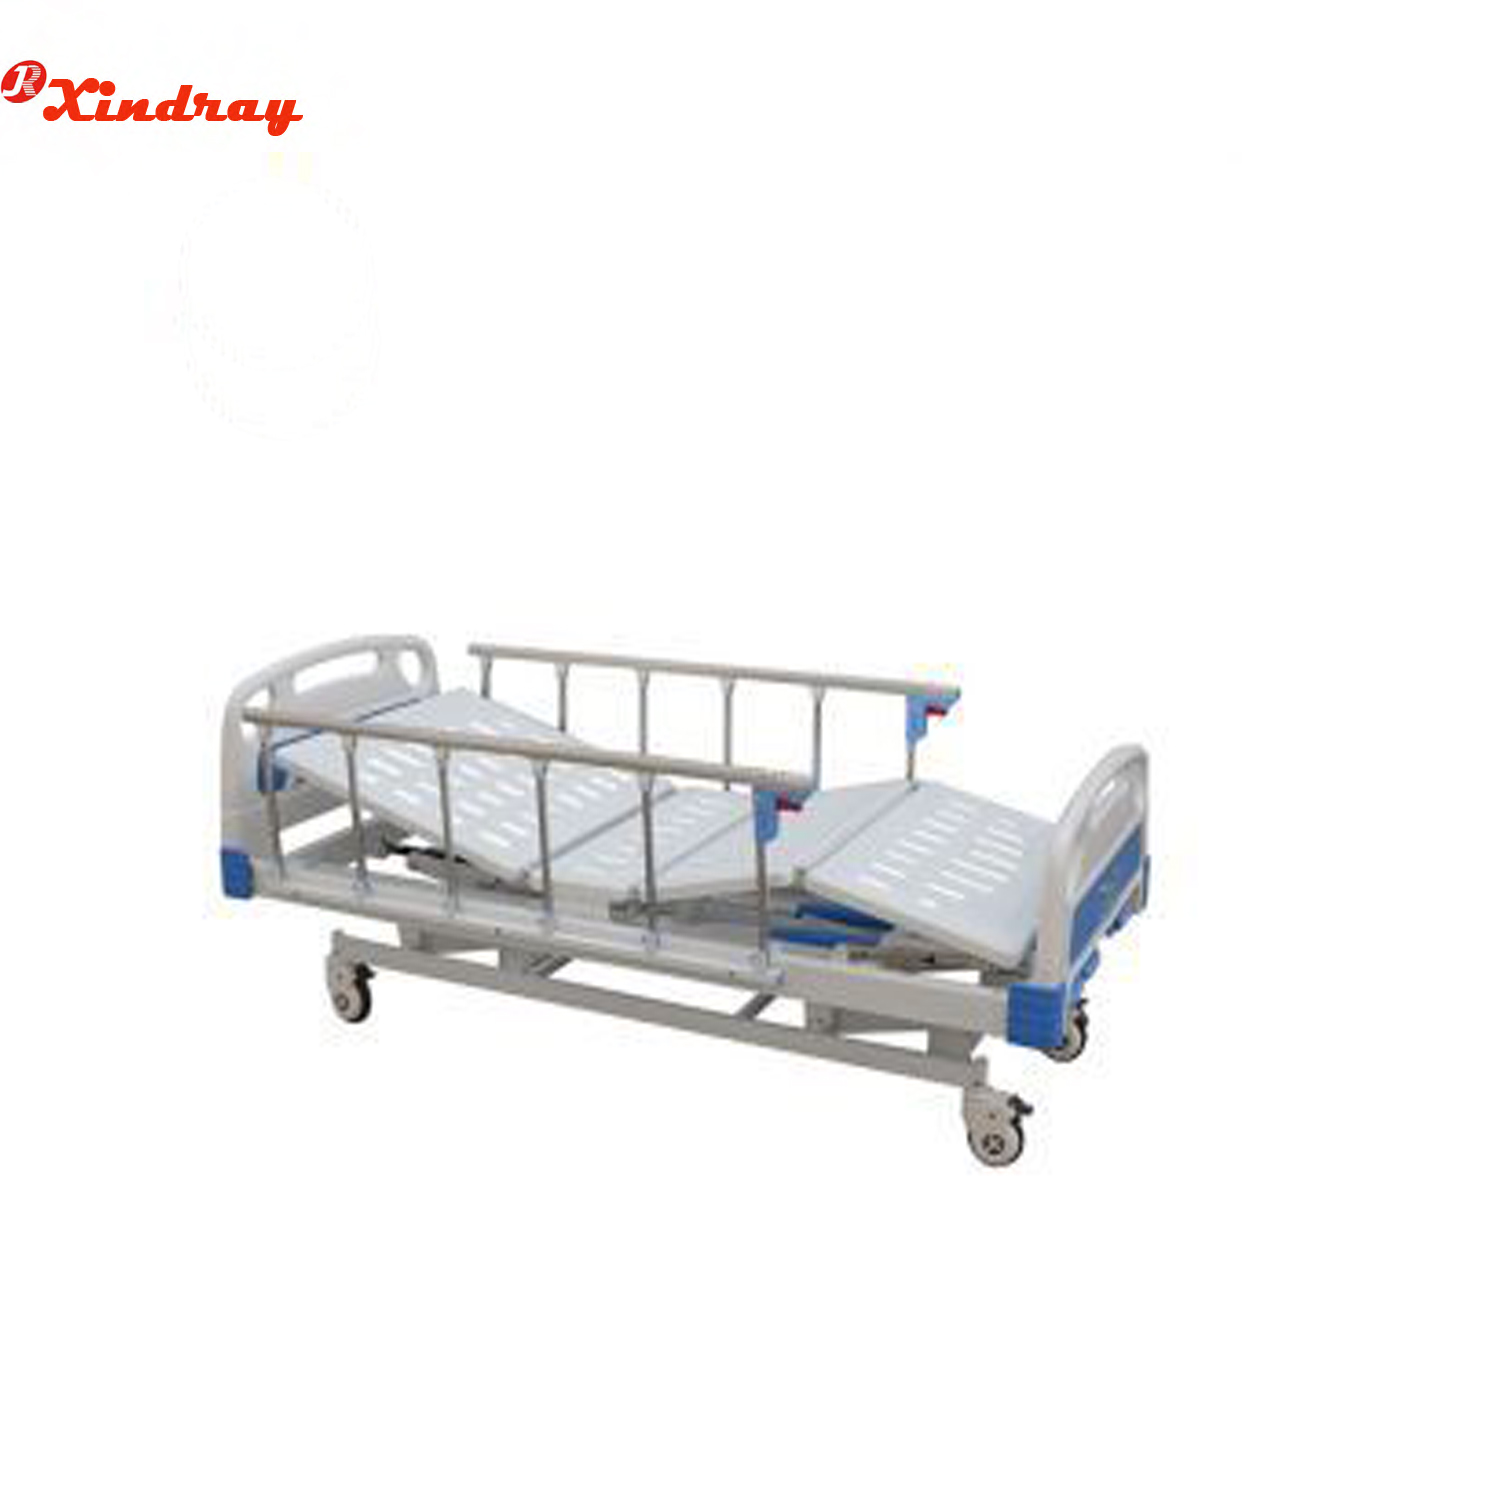 Three Function Manual Dialysis Bed